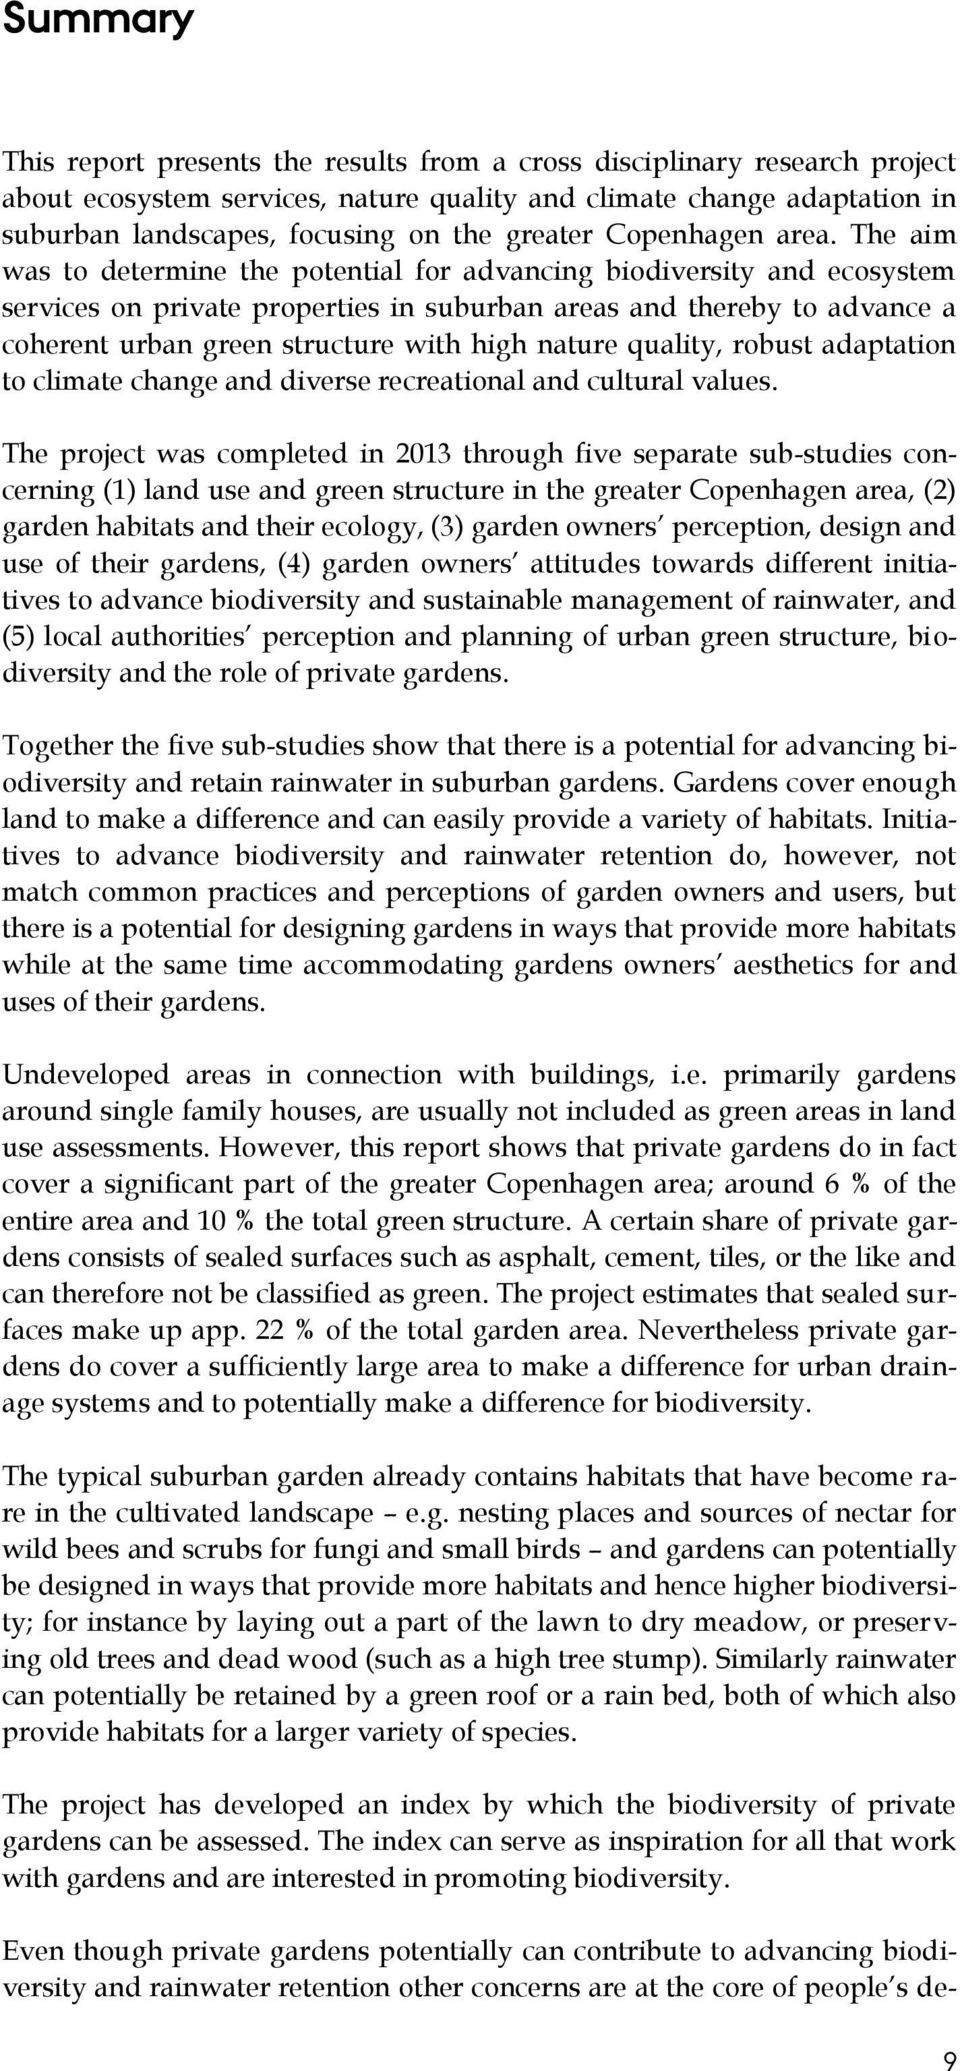 The aim was to determine the potential for advancing biodiversity and ecosystem services on private properties in suburban areas and thereby to advance a coherent urban green structure with high